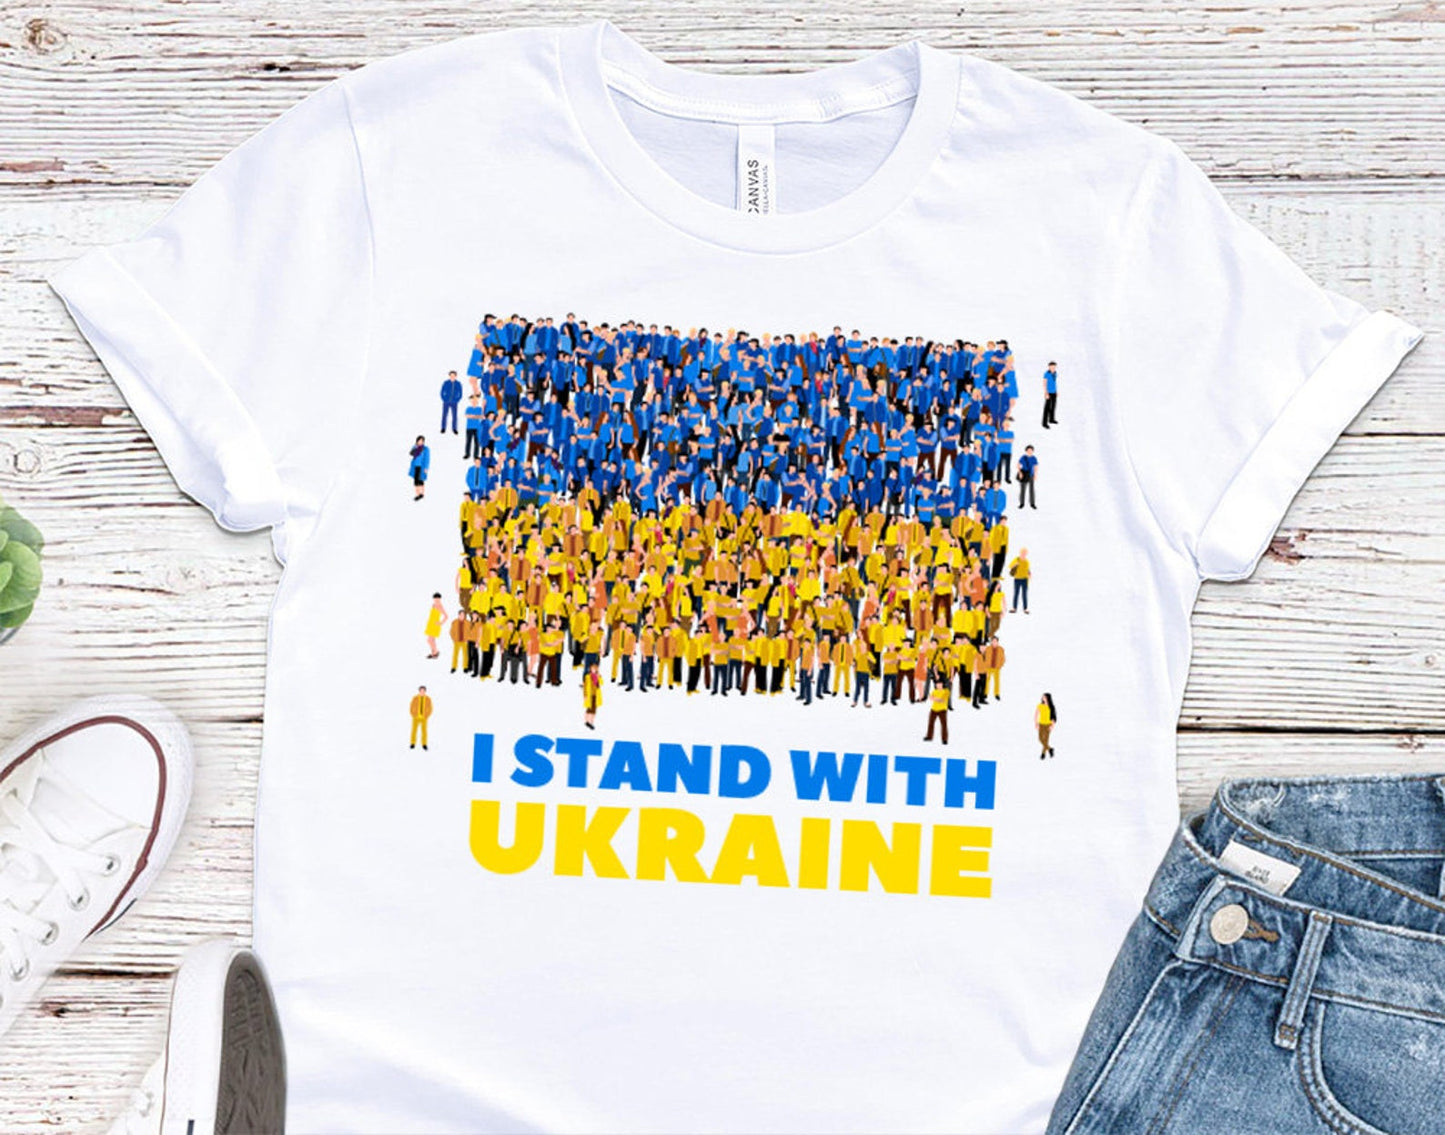 I Stand With Ukraine t-shirt for men or women - 37 Design Unit